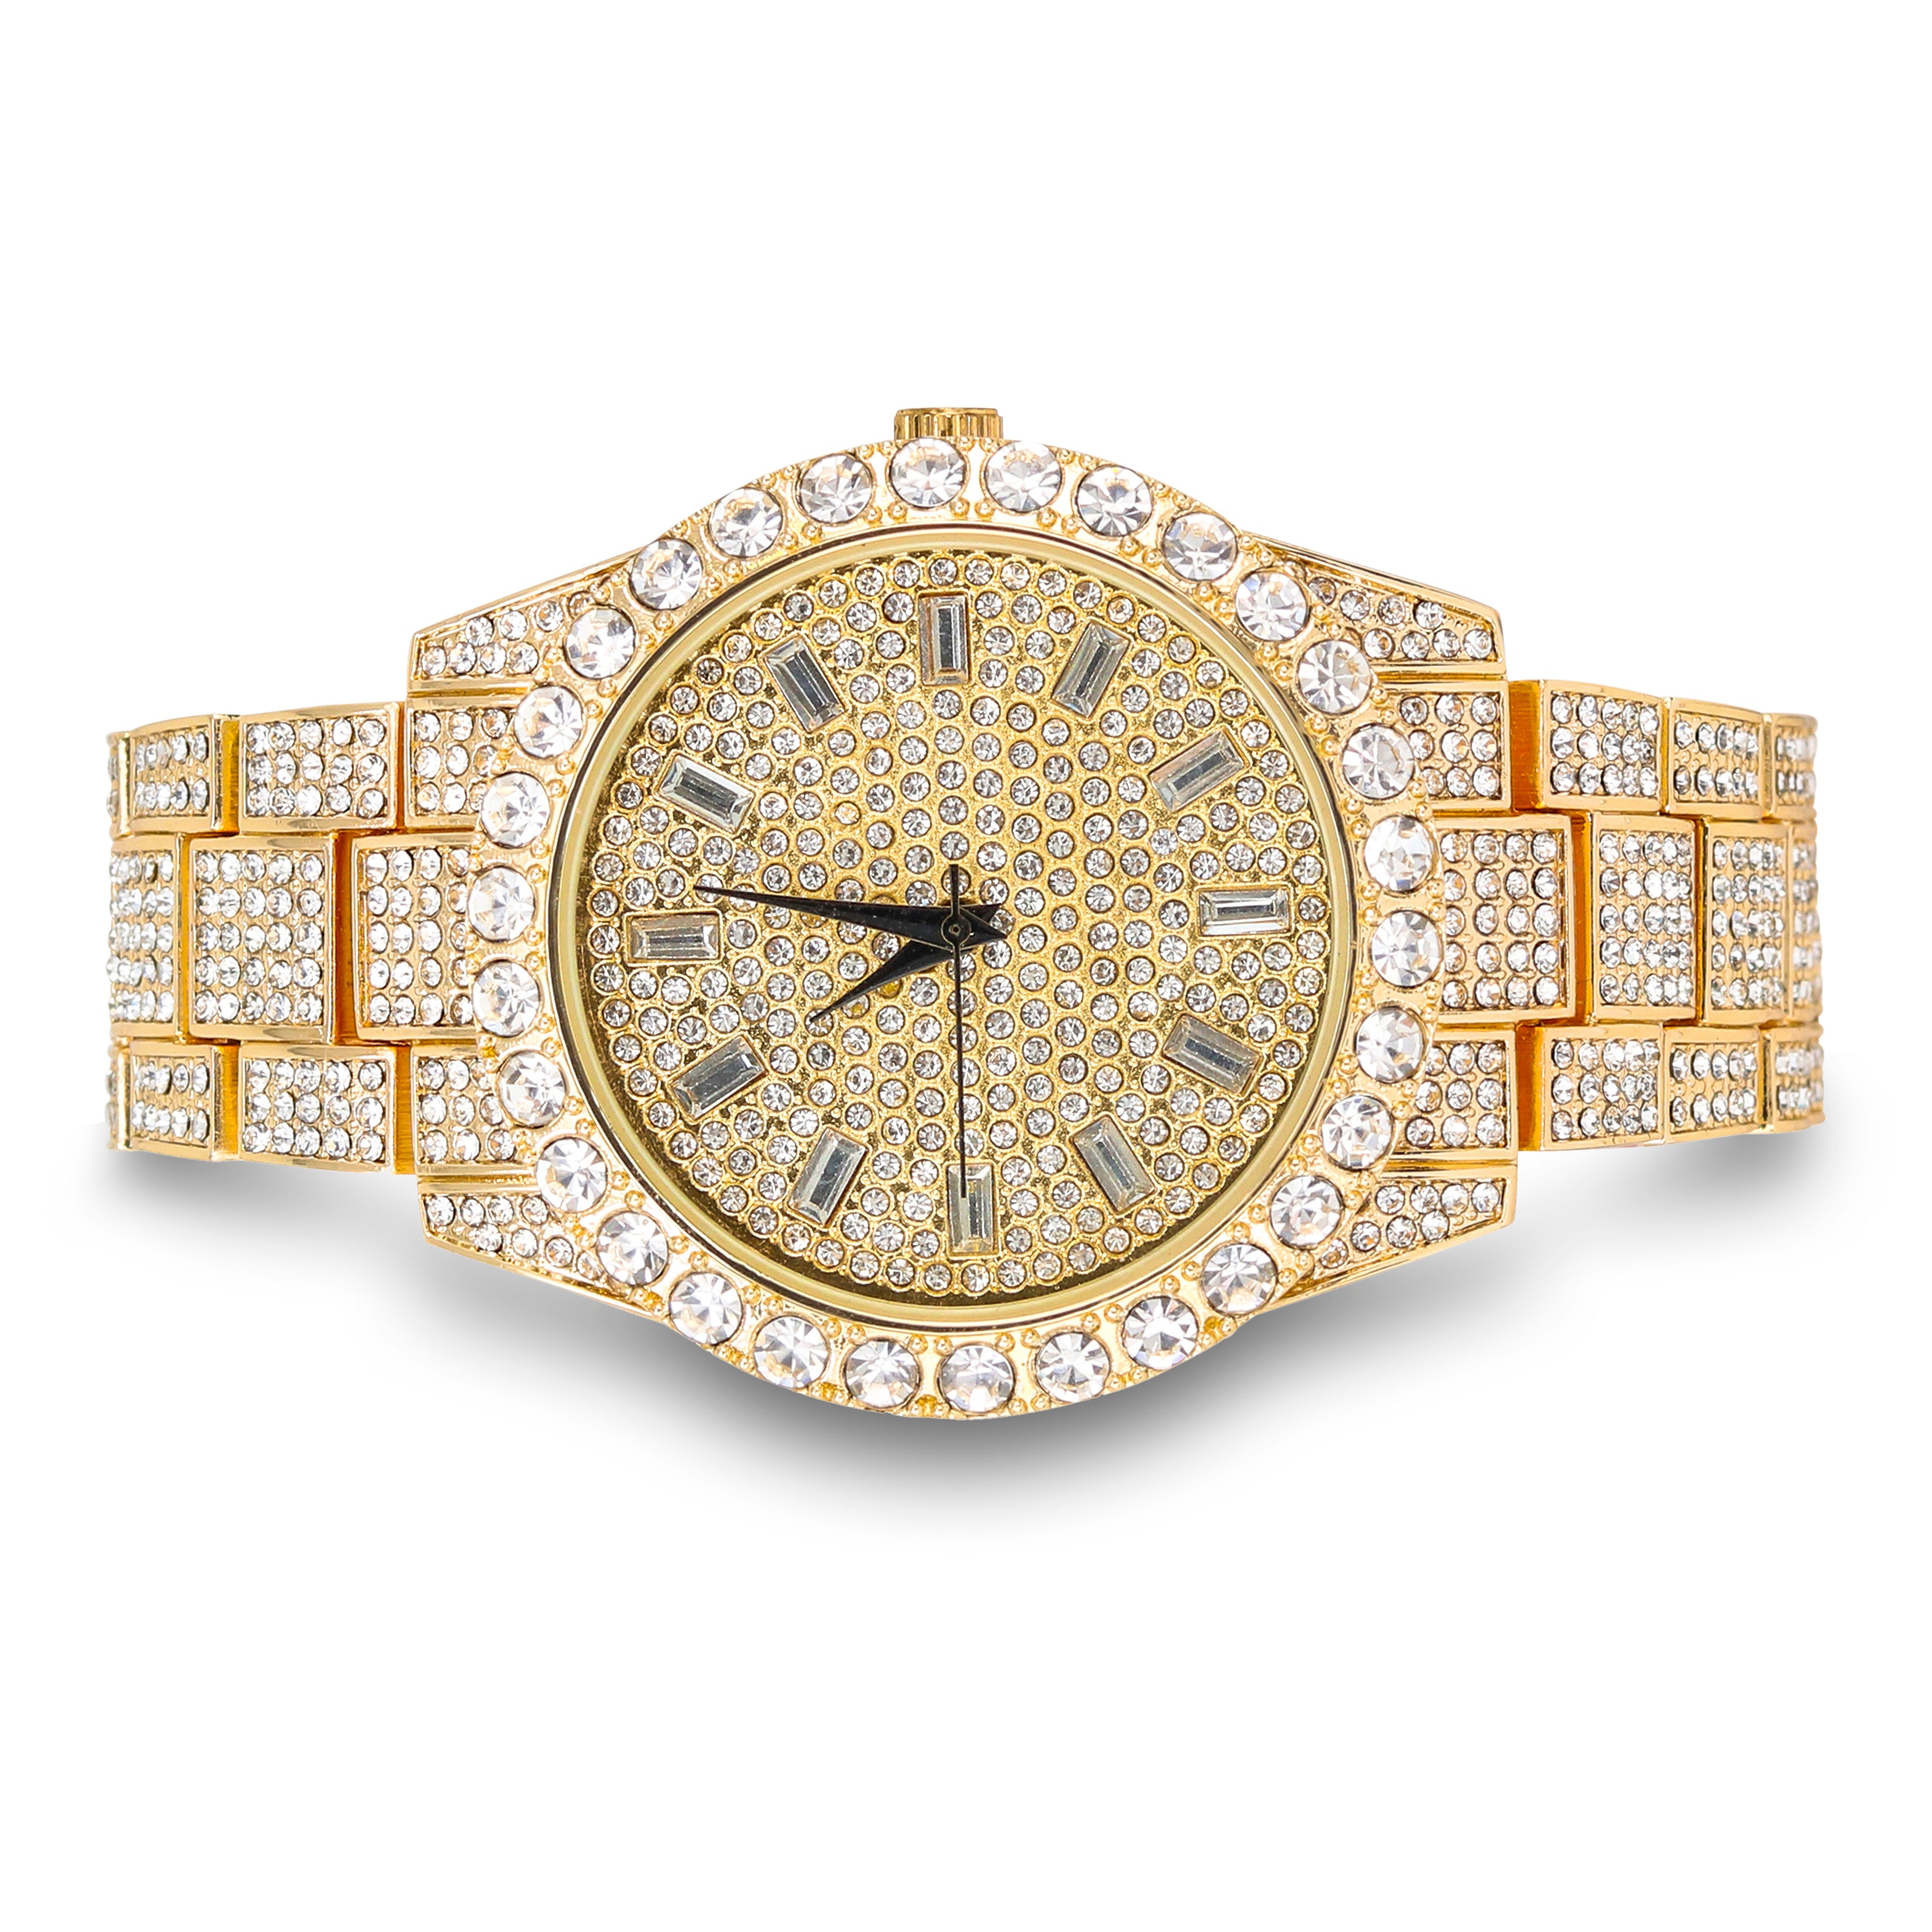 Men's Round Iced Out Watch 44mm Gold - Baguette Dial